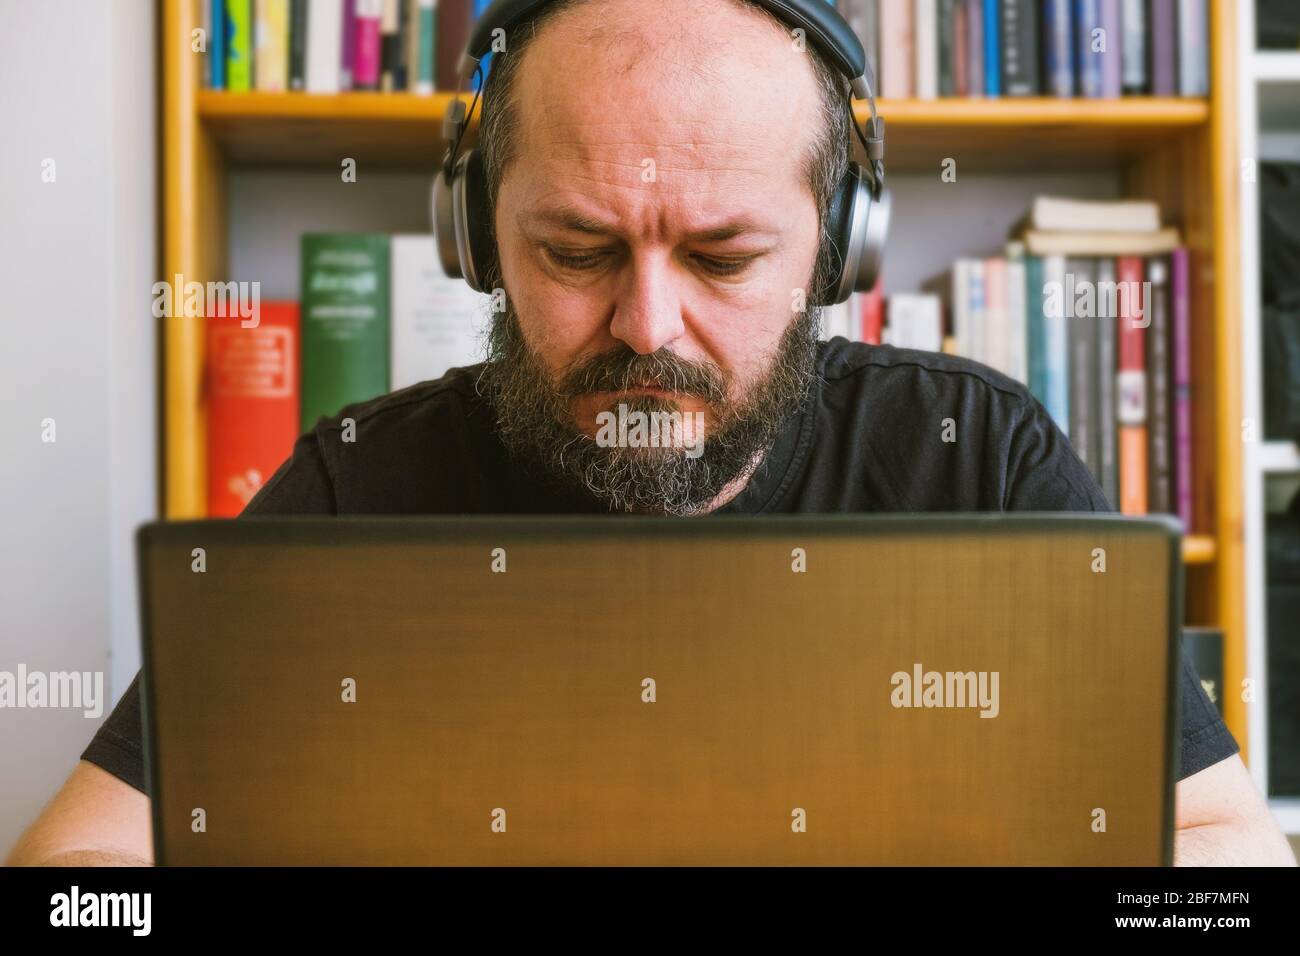 Home office work concept. Adult bearded man concentrated, working online from home on computer laptop, book shelves behind him Stock Photo